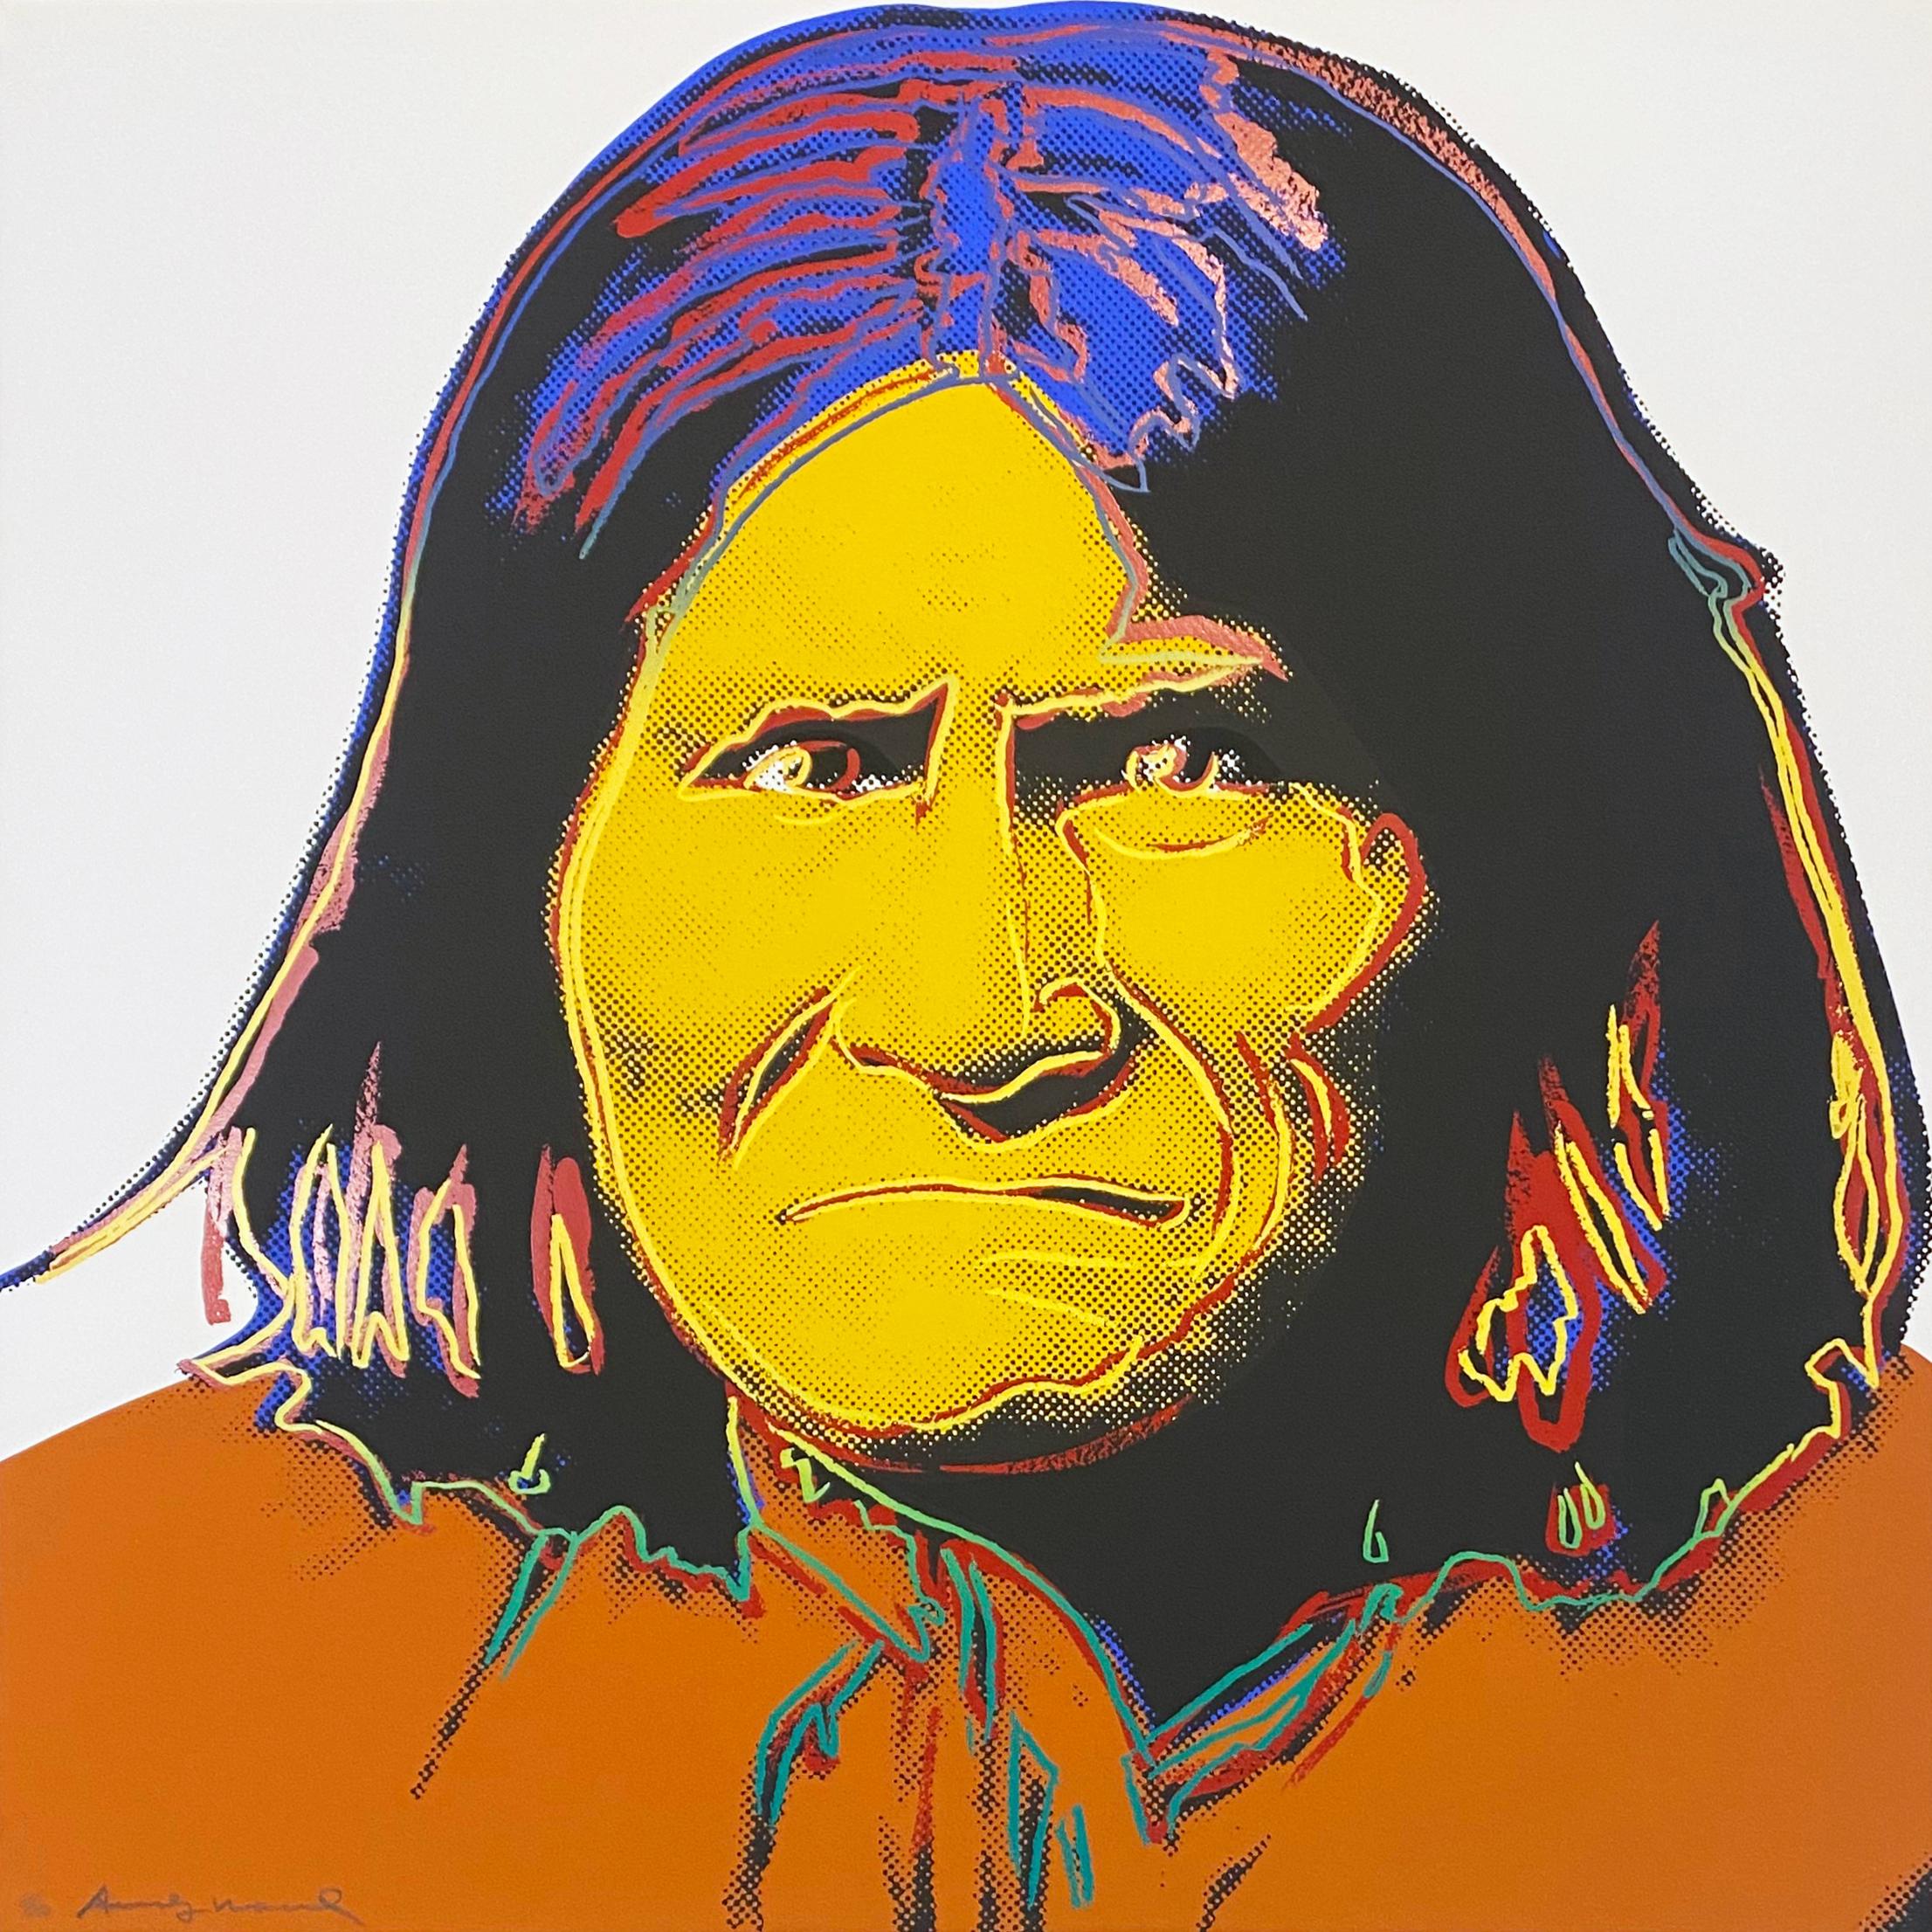 Artist: Andy Warhol
Title: Geronimo
Portfolio: Cowboys and Indians
Medium: Screenprint on Lenox Museum Board
Year: 1986
Edition: 81/250
Signed: Hand signed and numbered in pencil
Reference: Feldman II.384
Sheet Size: 36" x 36"
Image Size: 36" x 36"